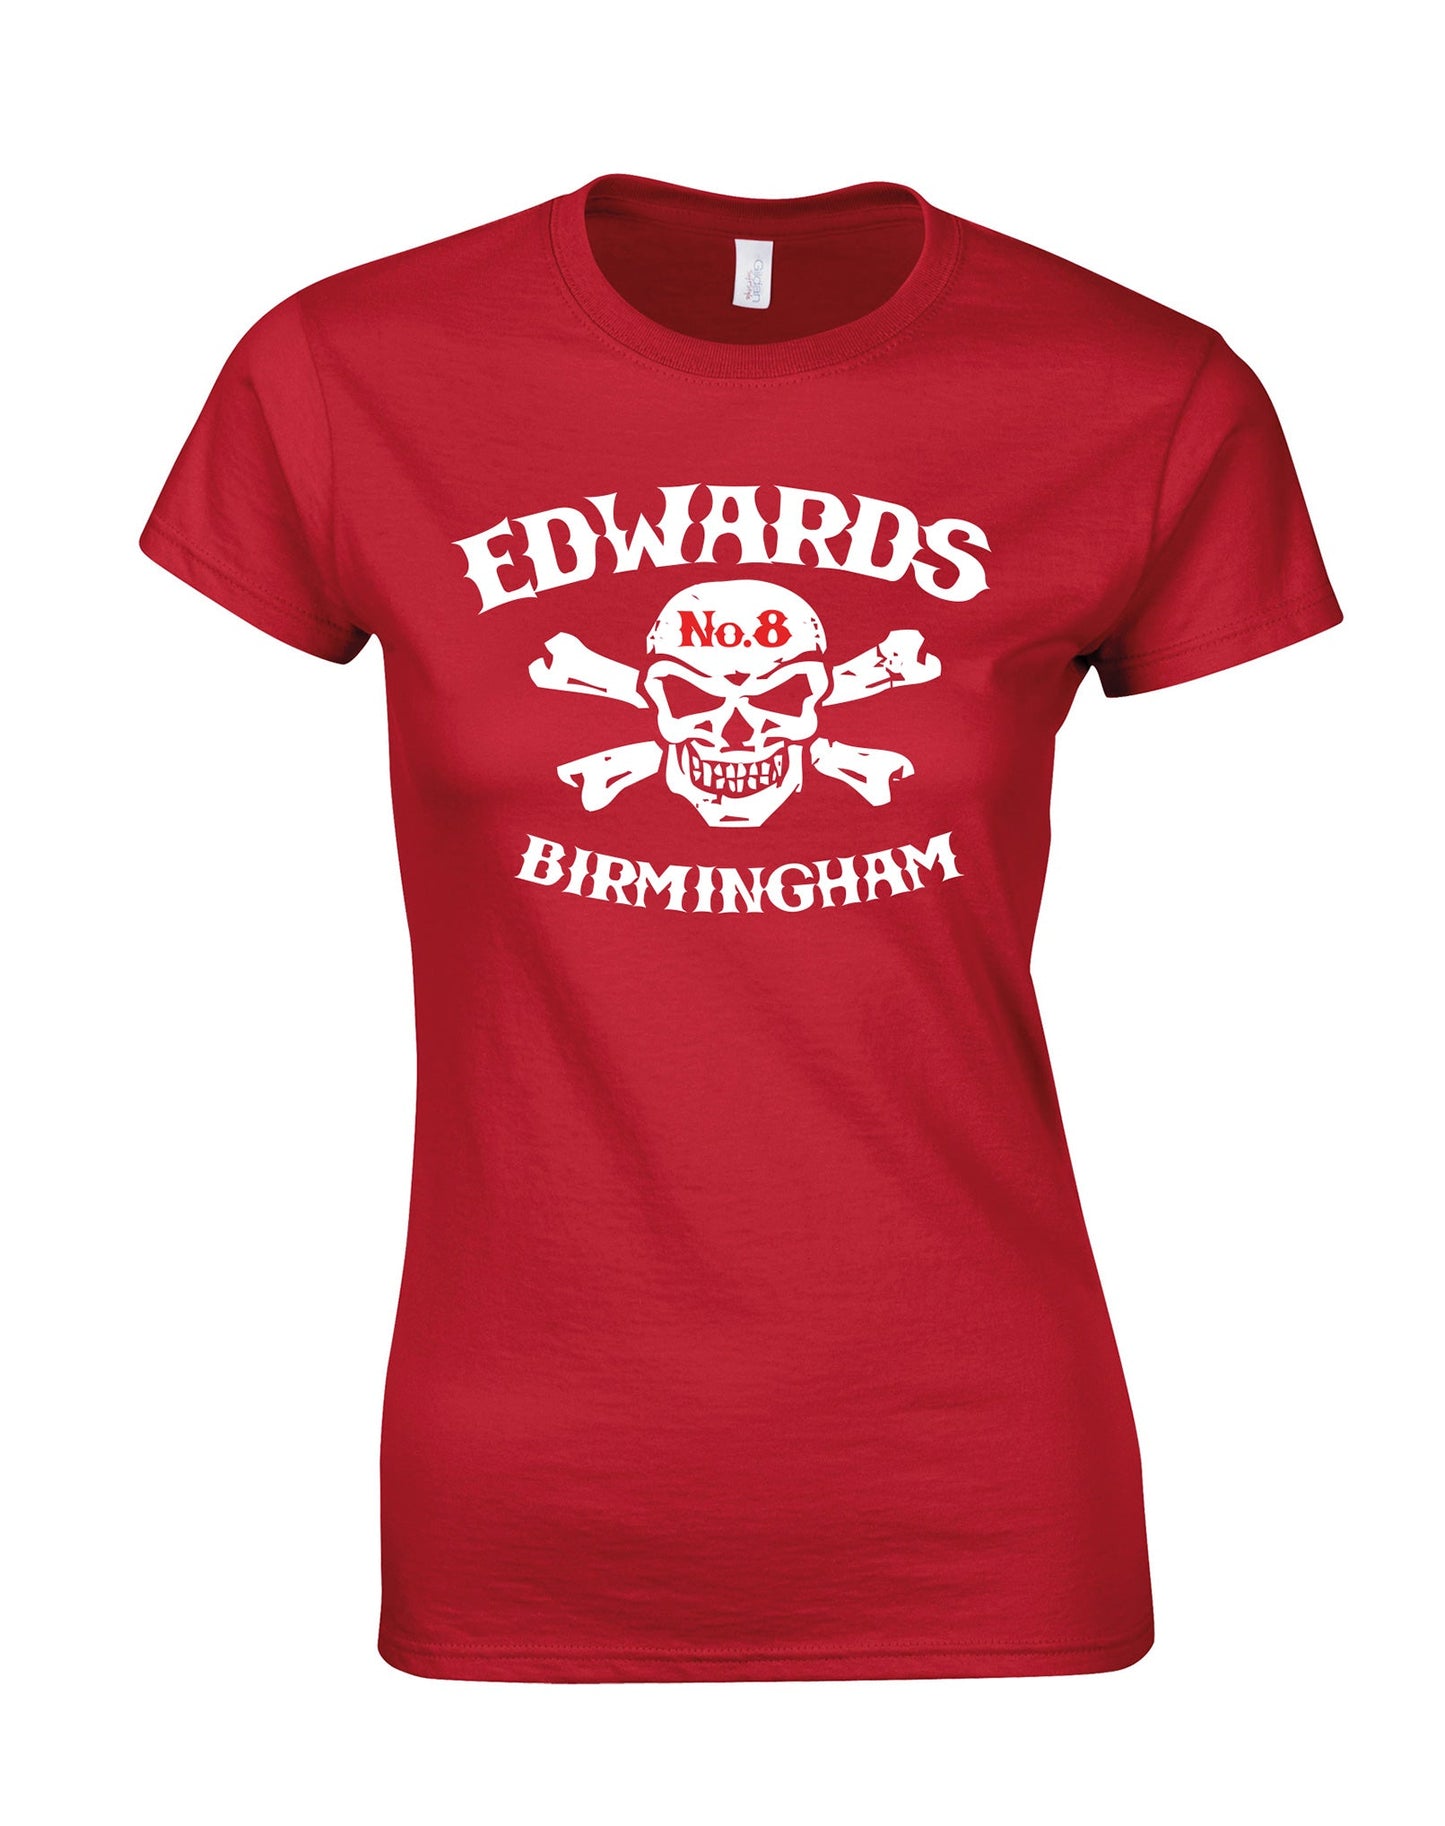 Edwards No. 8 skull/crossbones ladies fit T-shirt - various colours - Dirty Stop Outs